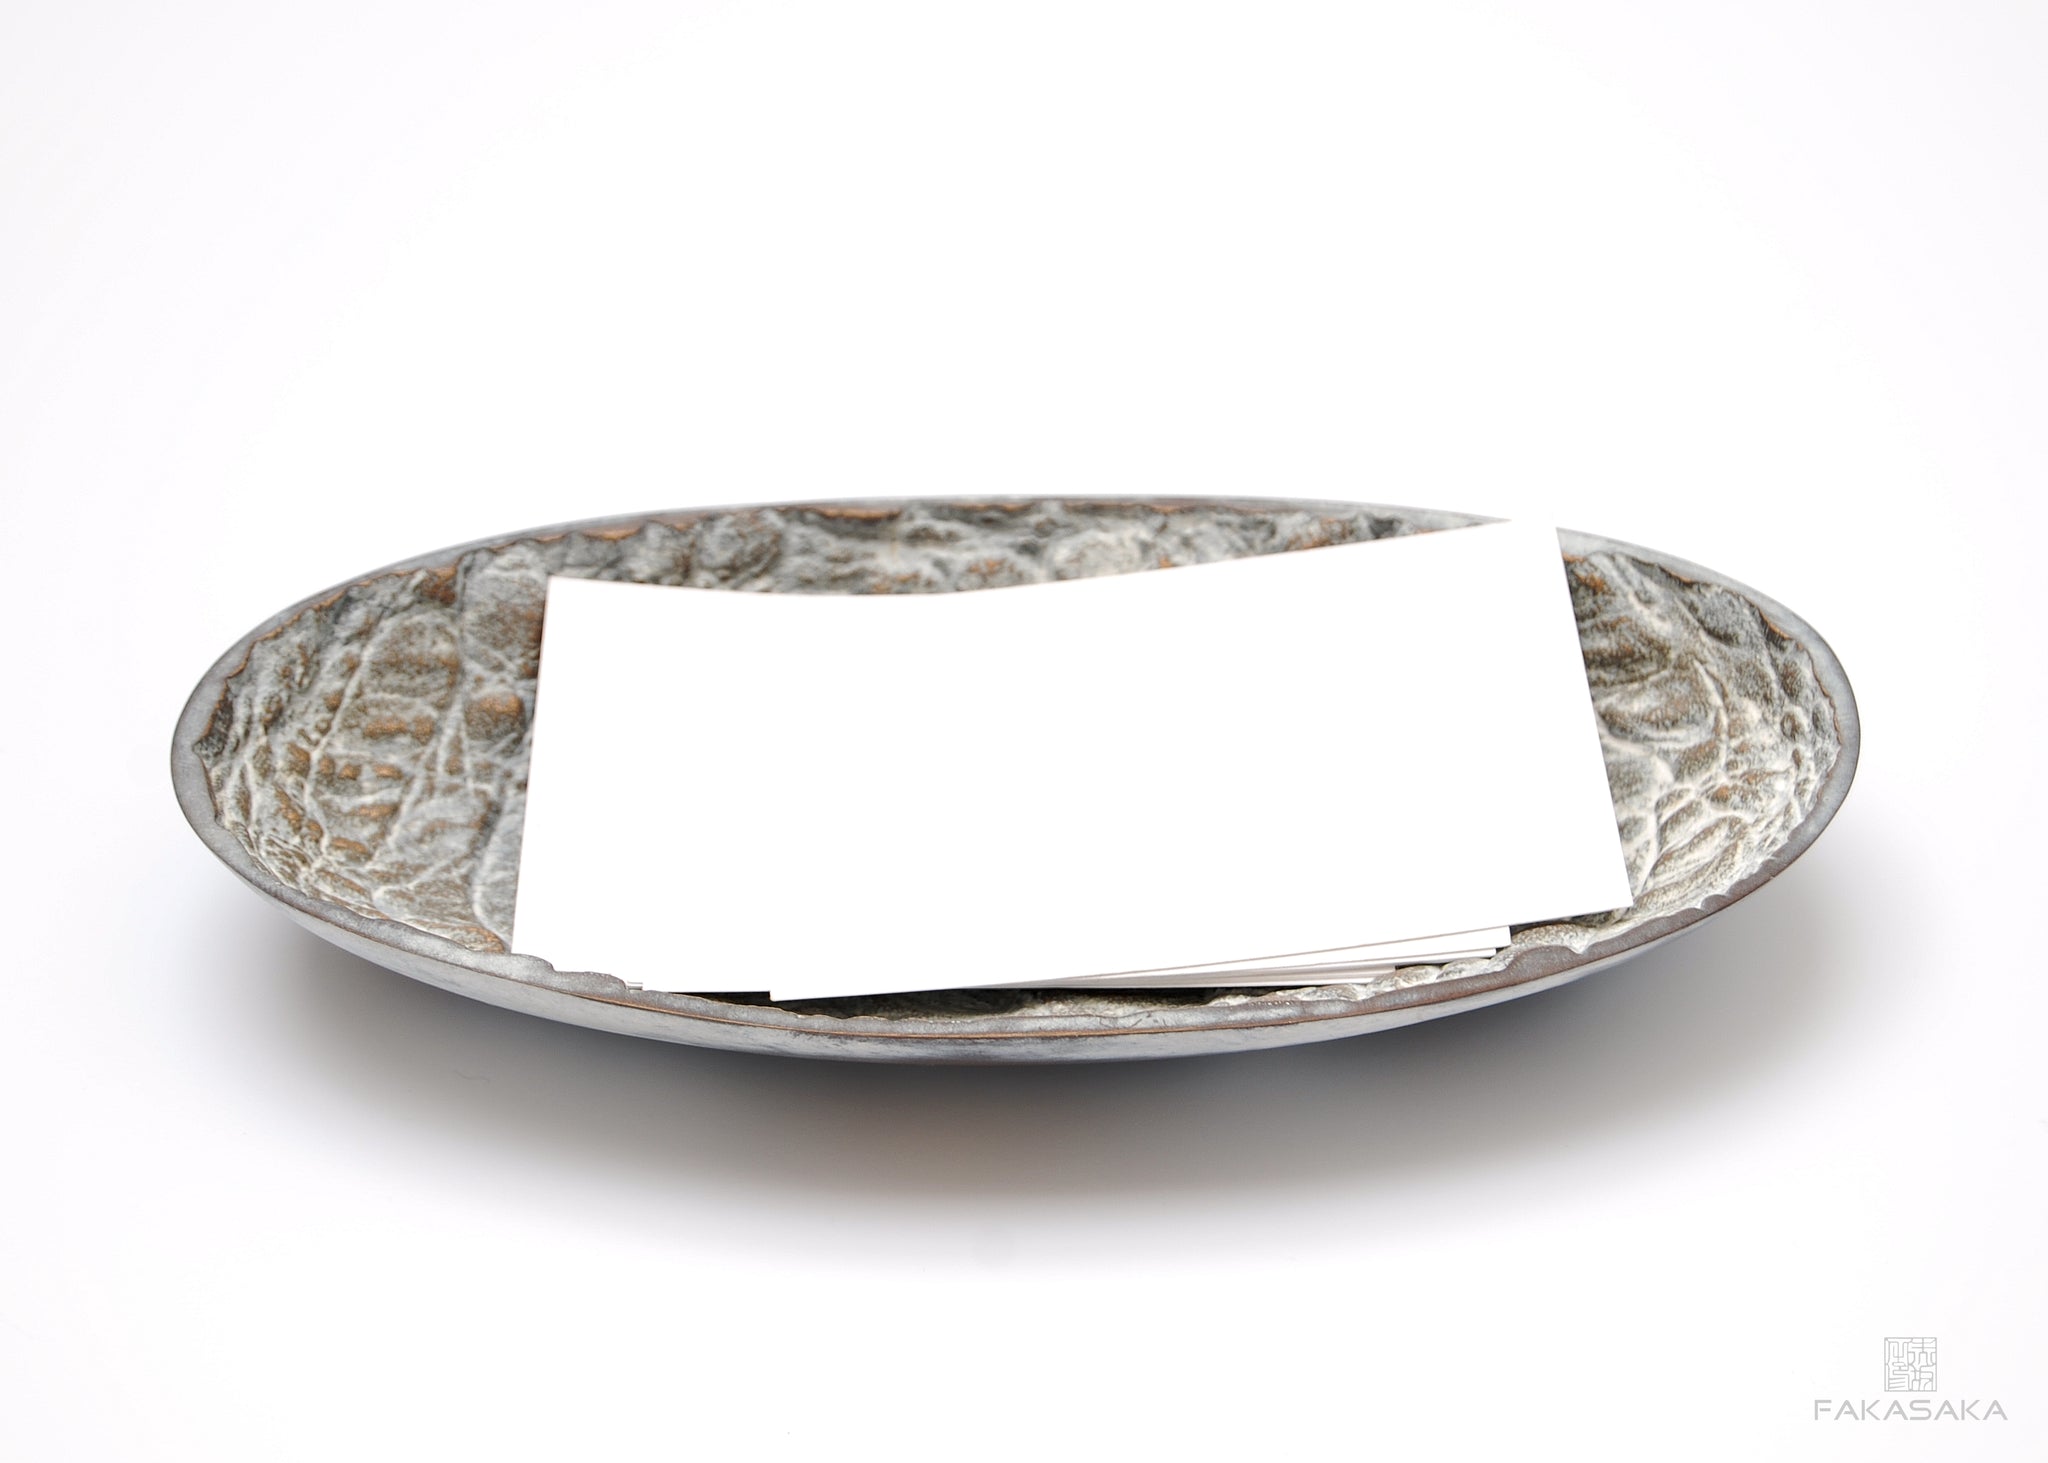 POLLY JEAN<br><br>SMALL TRAY / SMALL BOWL / ASHTRAY / CARD HOLDER / PEN HOLDER<br><br>OFF-WHITE BRONZE